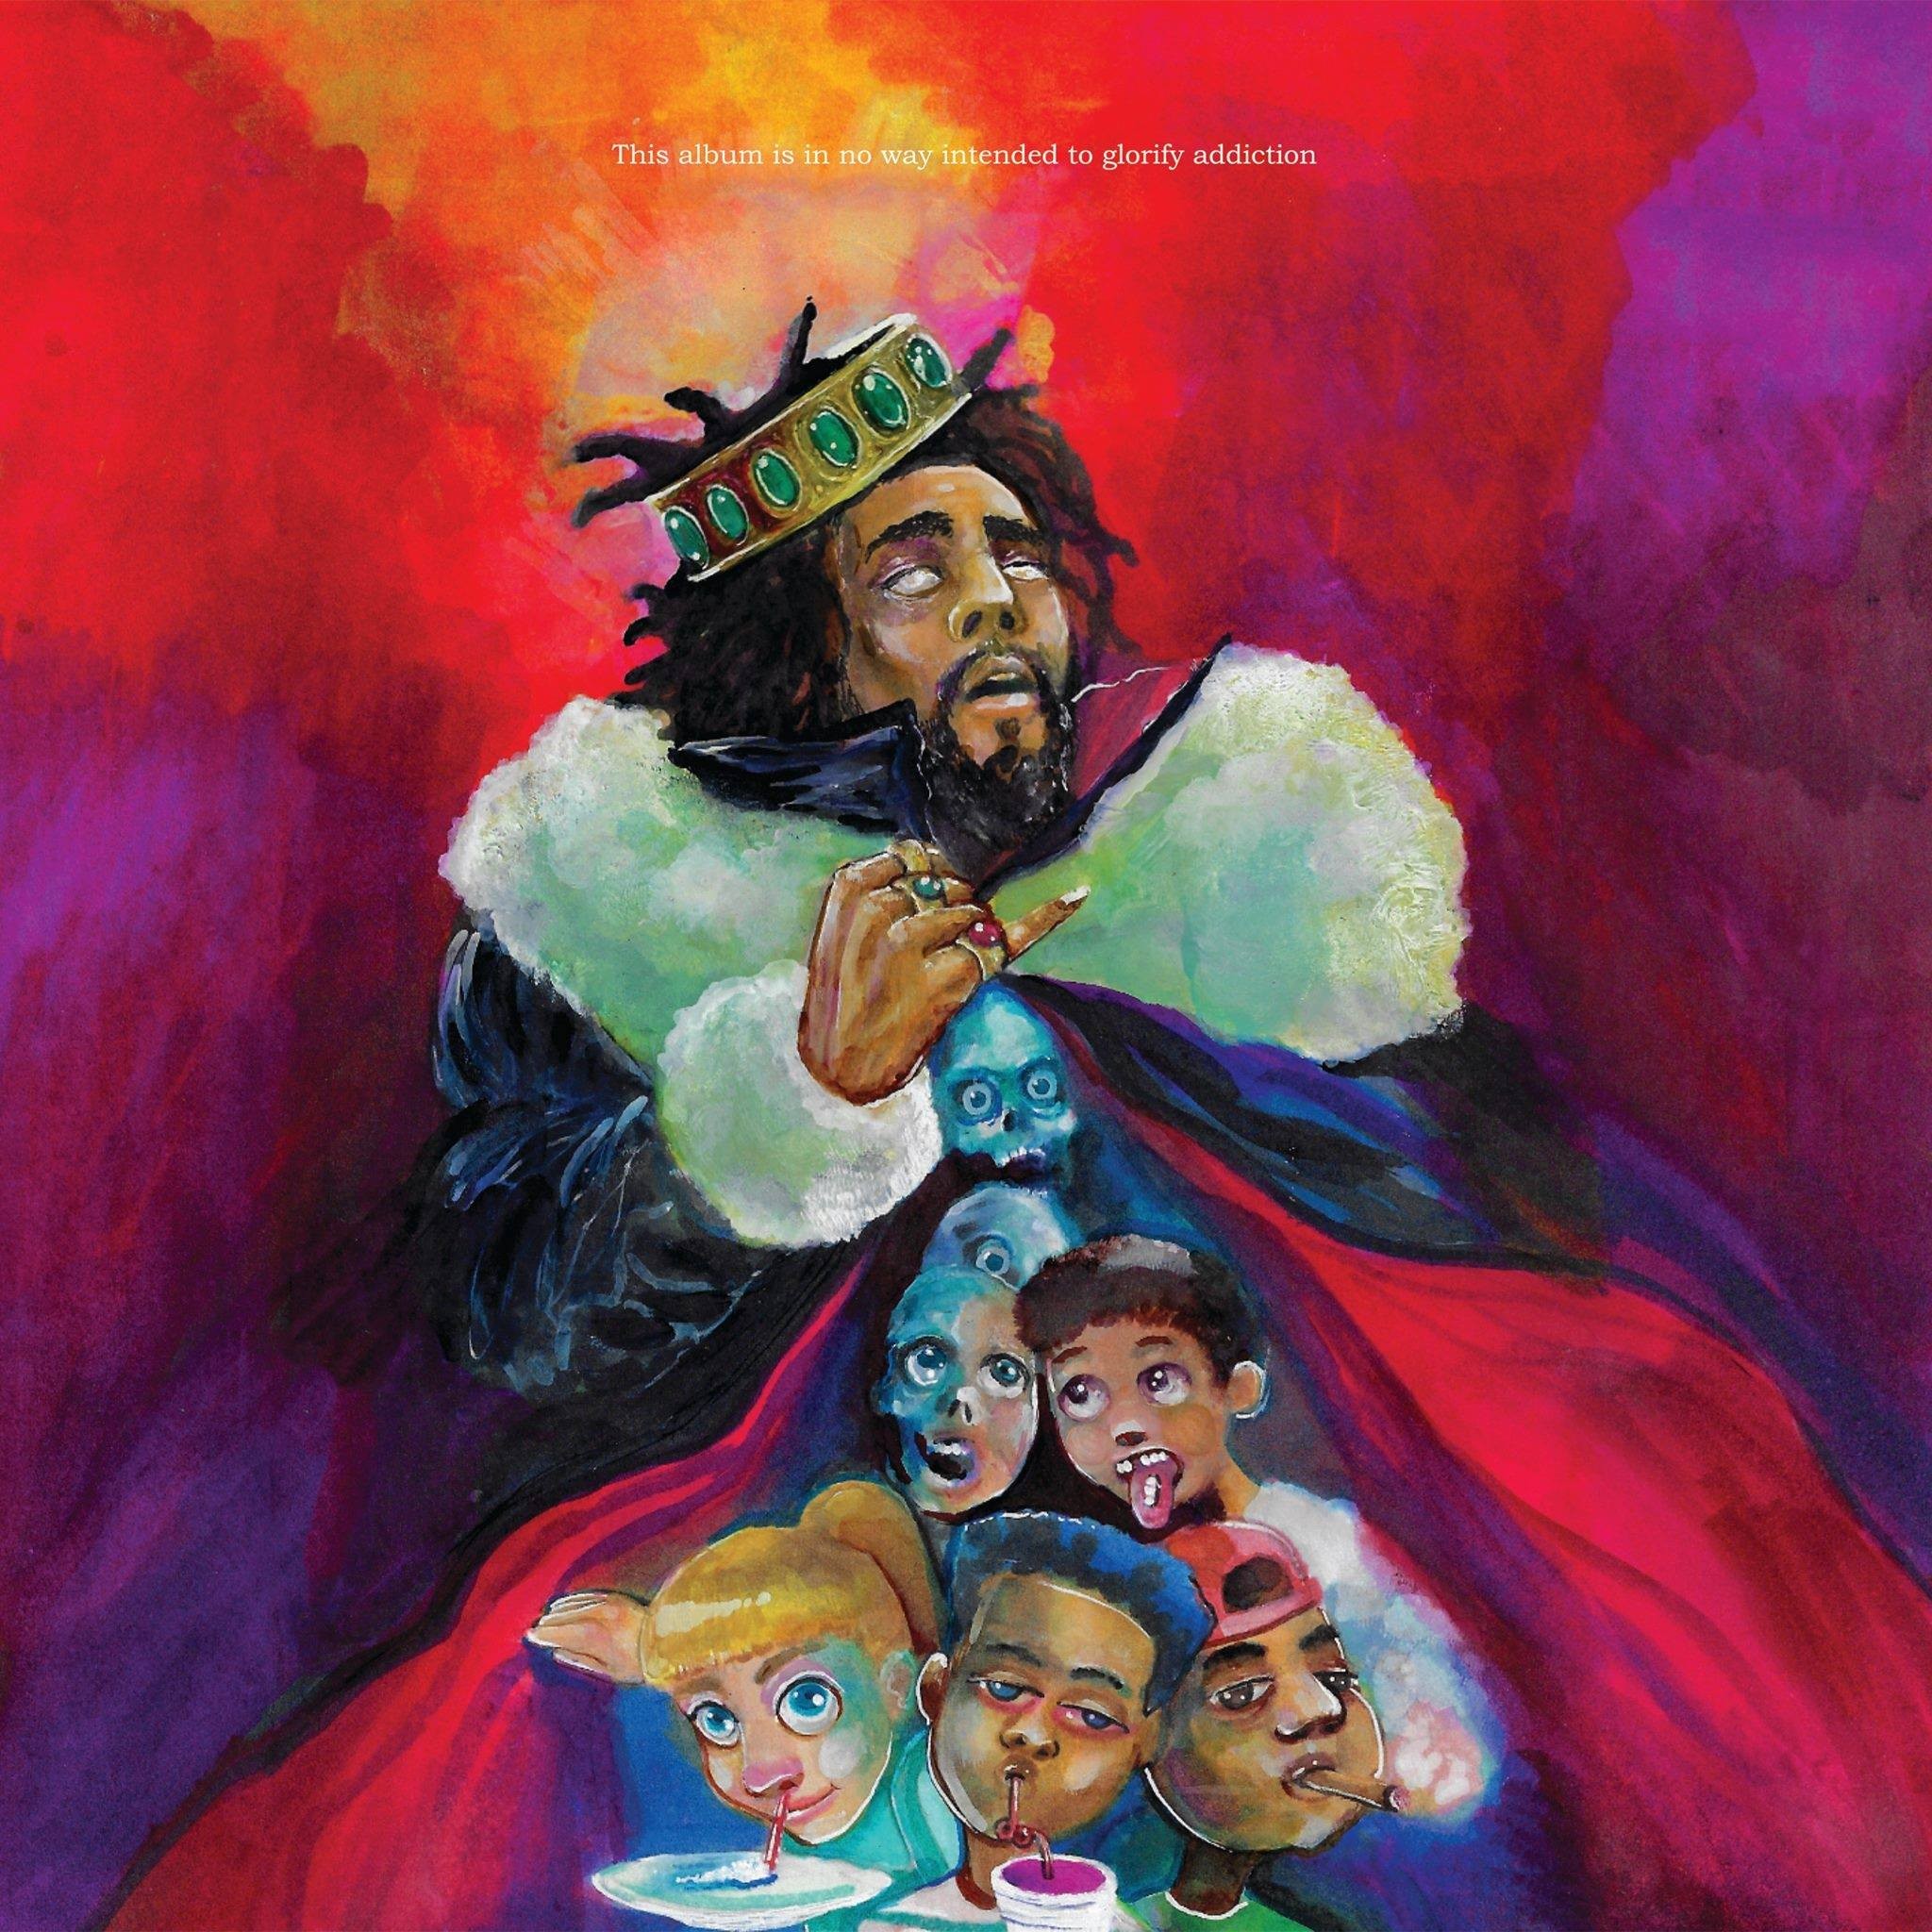 Cover of "KOD" by J. Cole